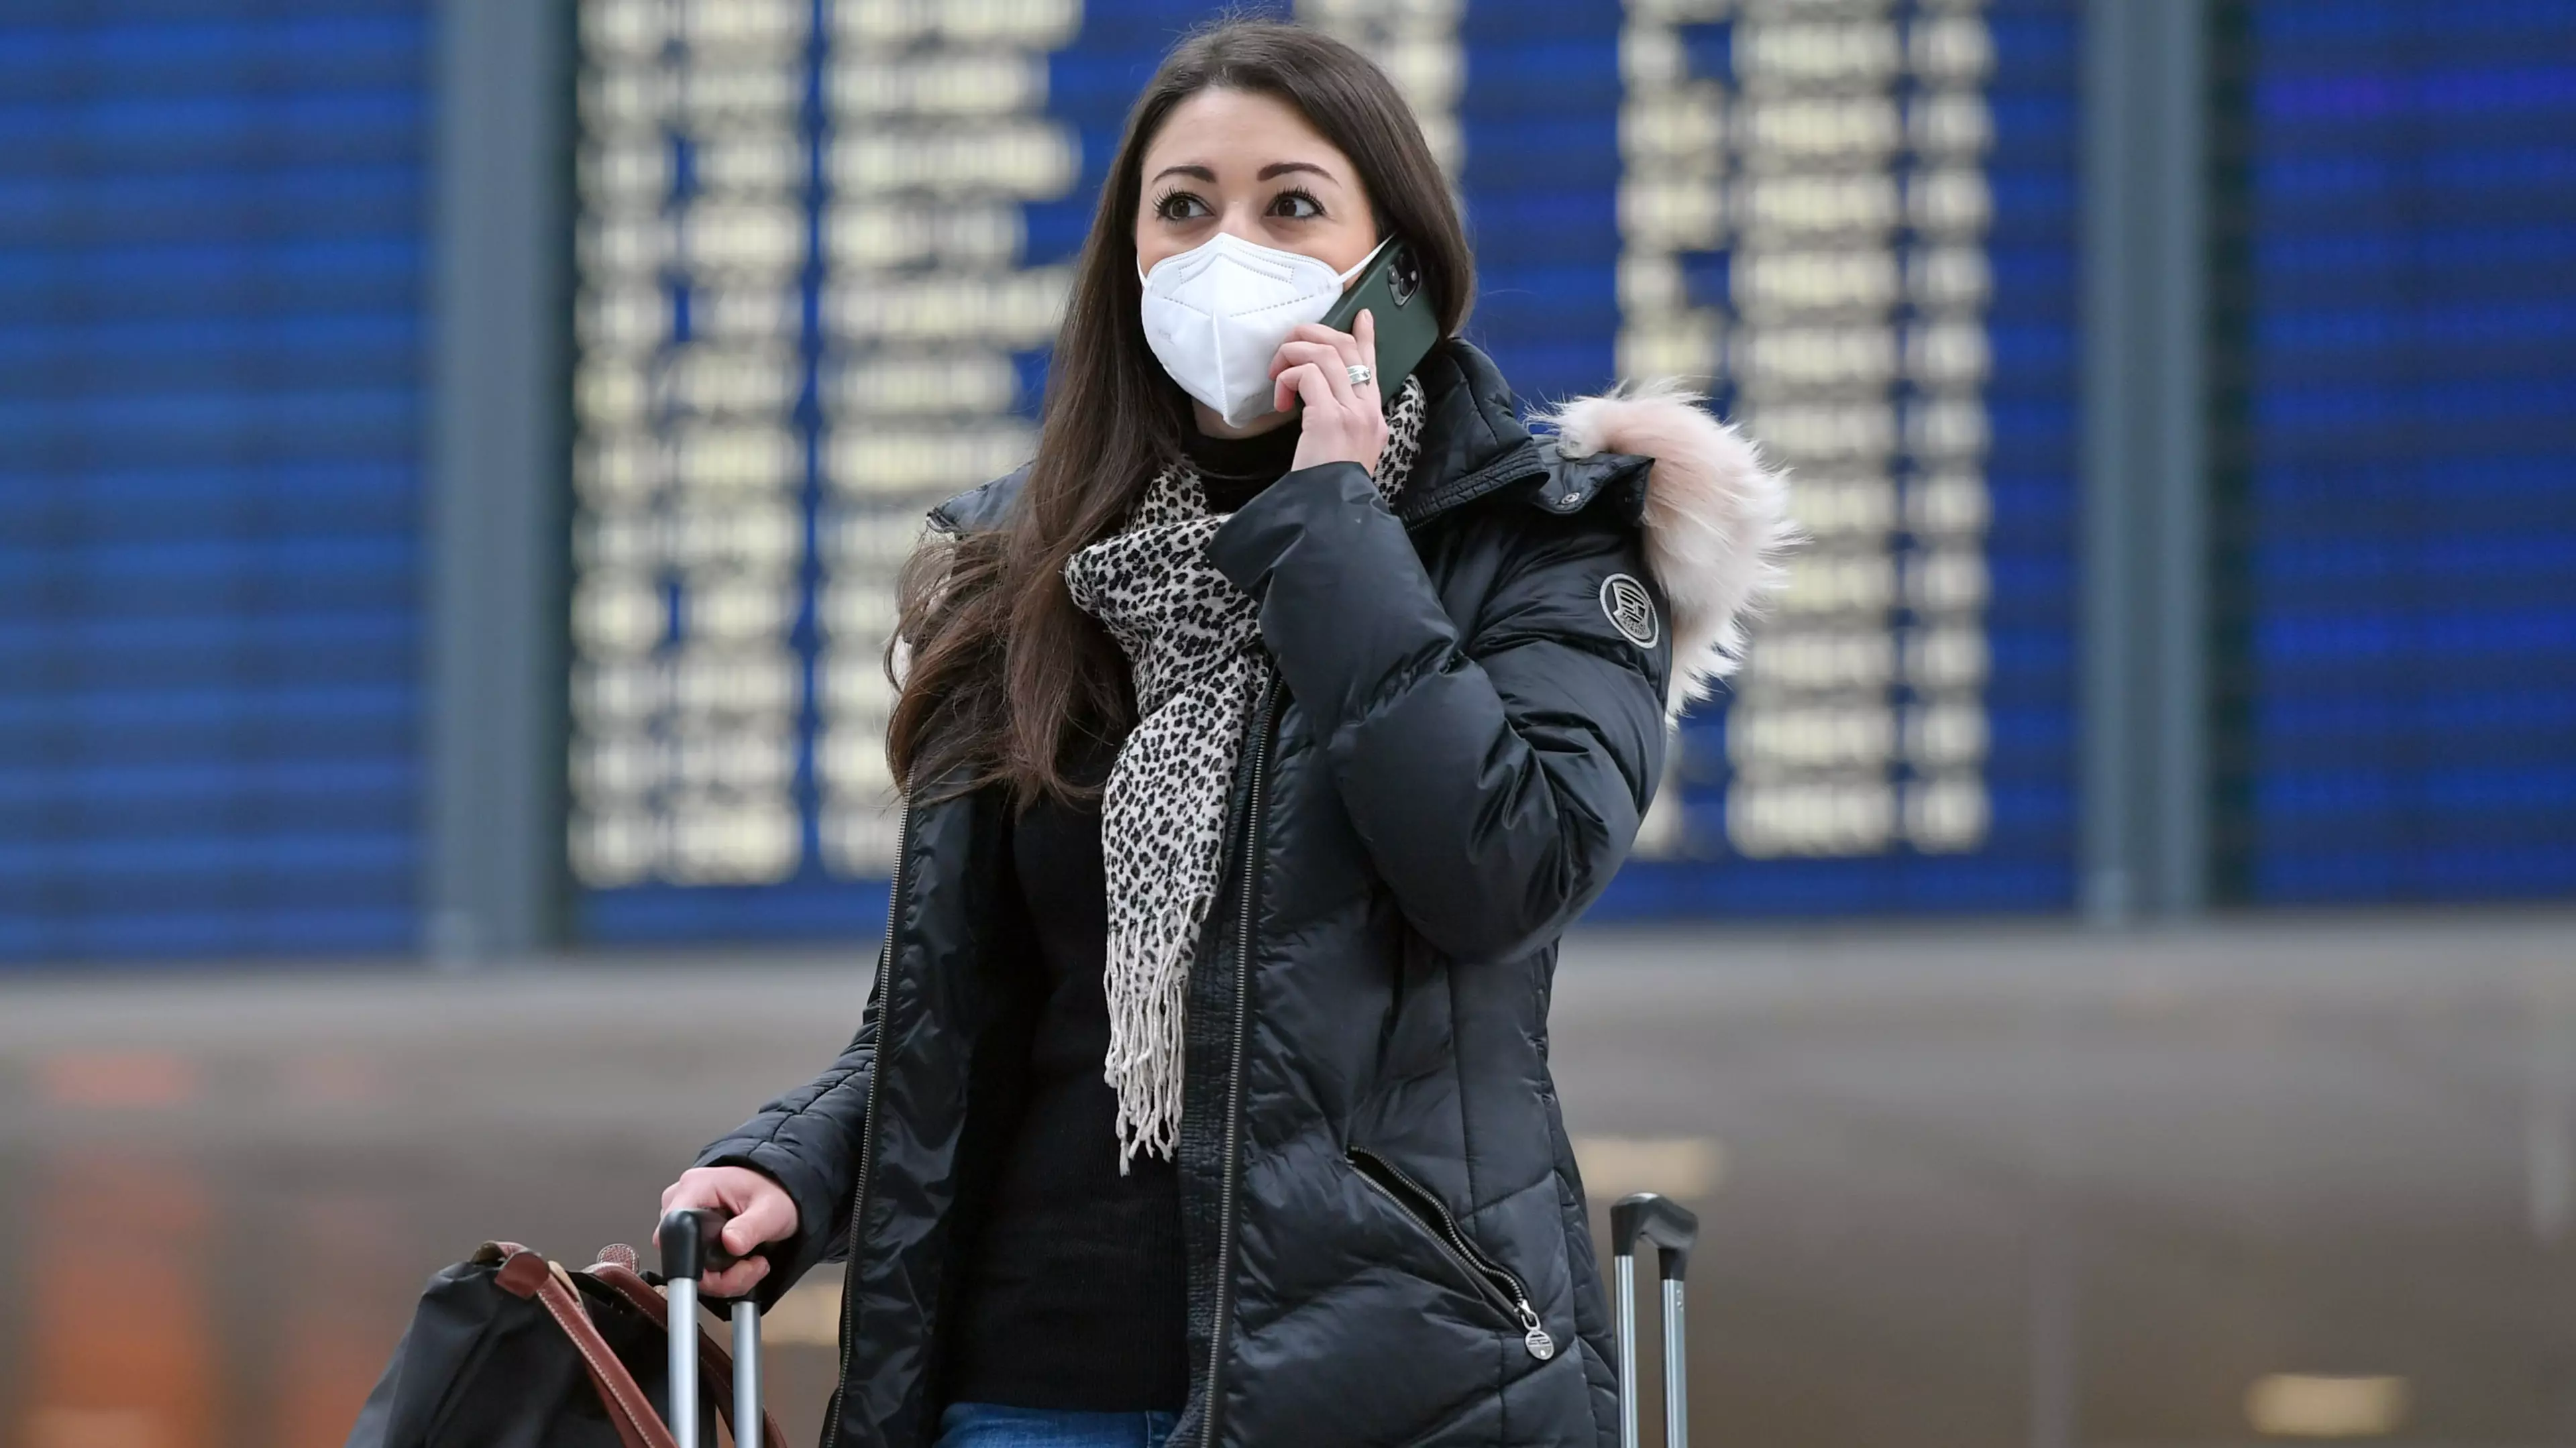 Fines Of Up To $50,000 For Those Who Don't Wear Face Masks In Western Australian Airports